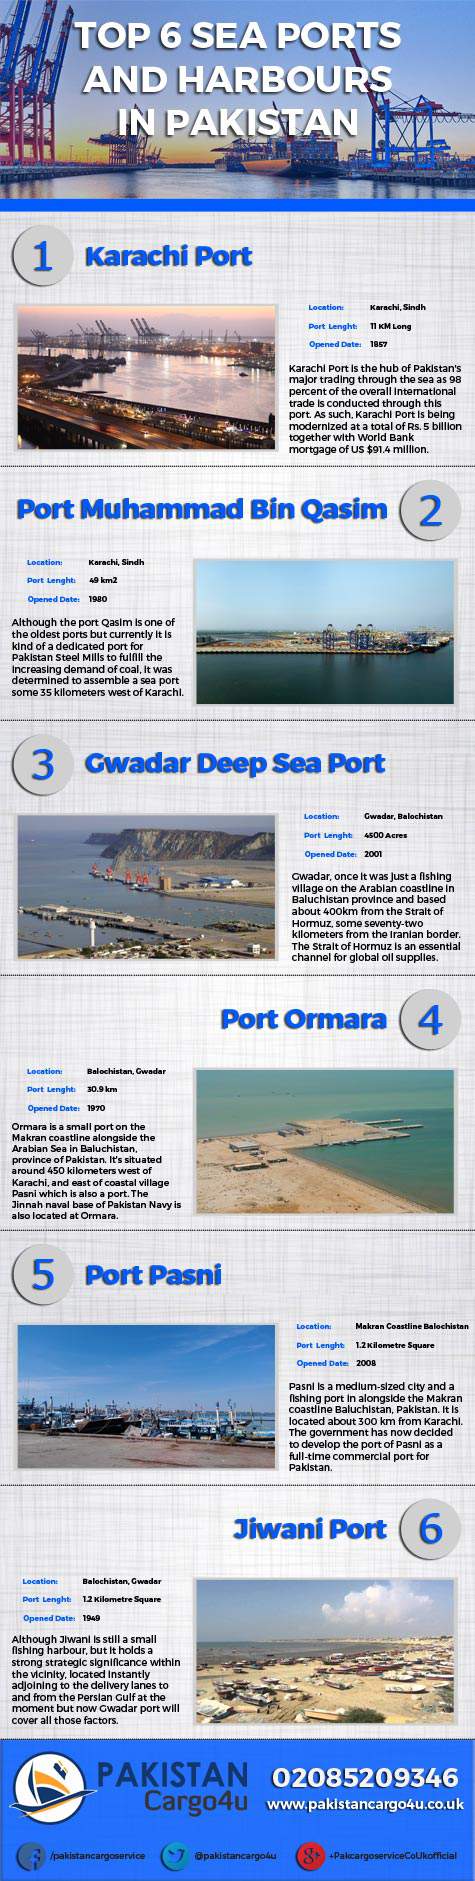 Top 6 Sea Ports and Harbours in Pakistan